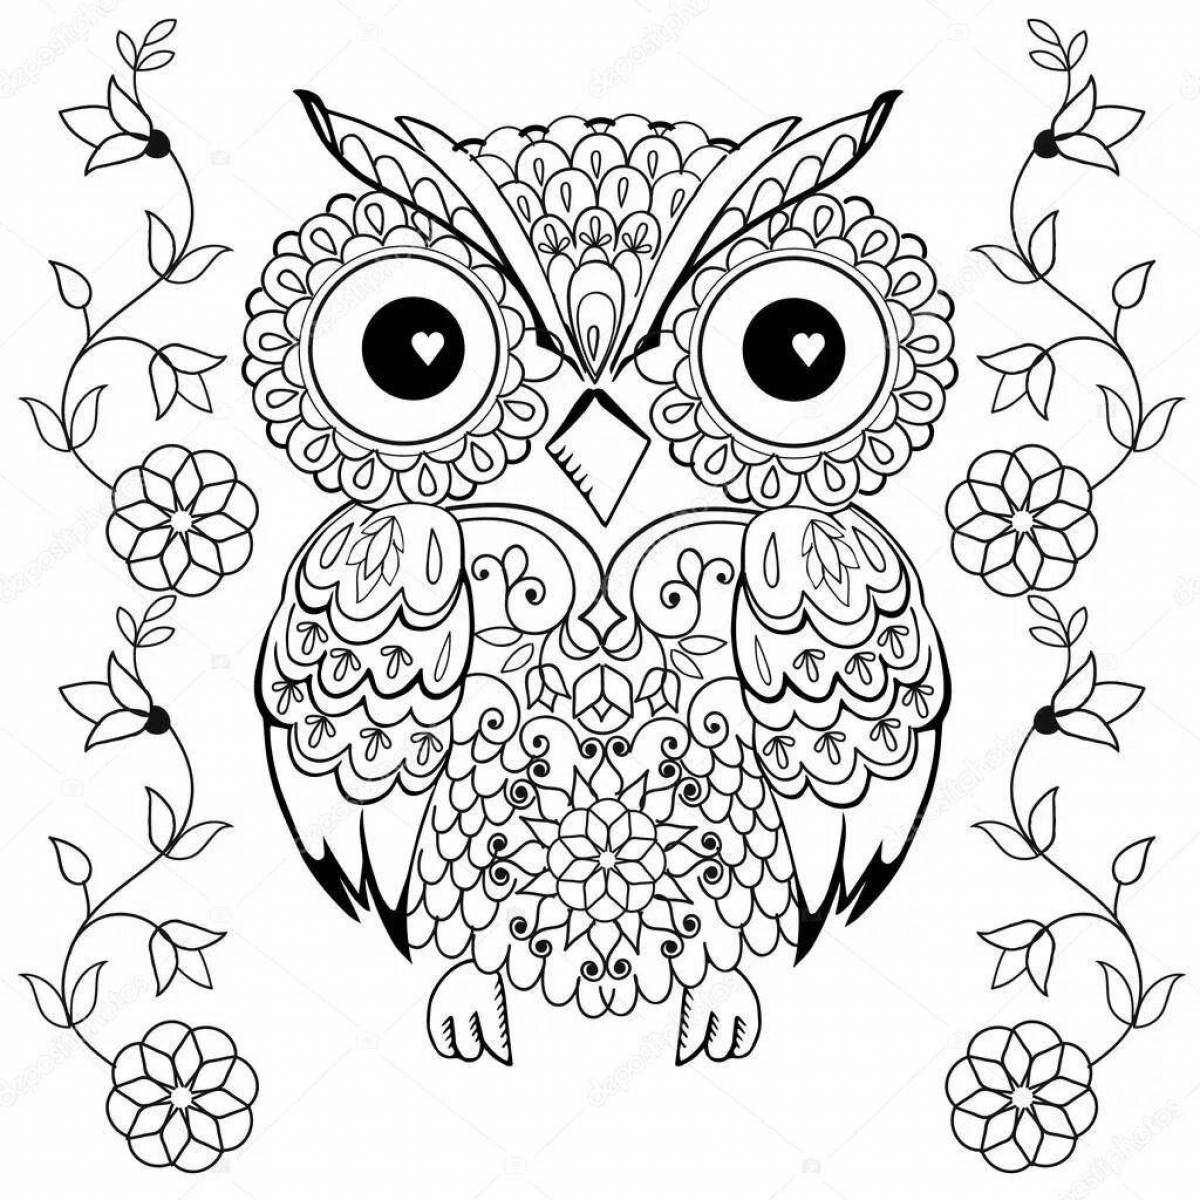 Fabulous owl coloring by numbers